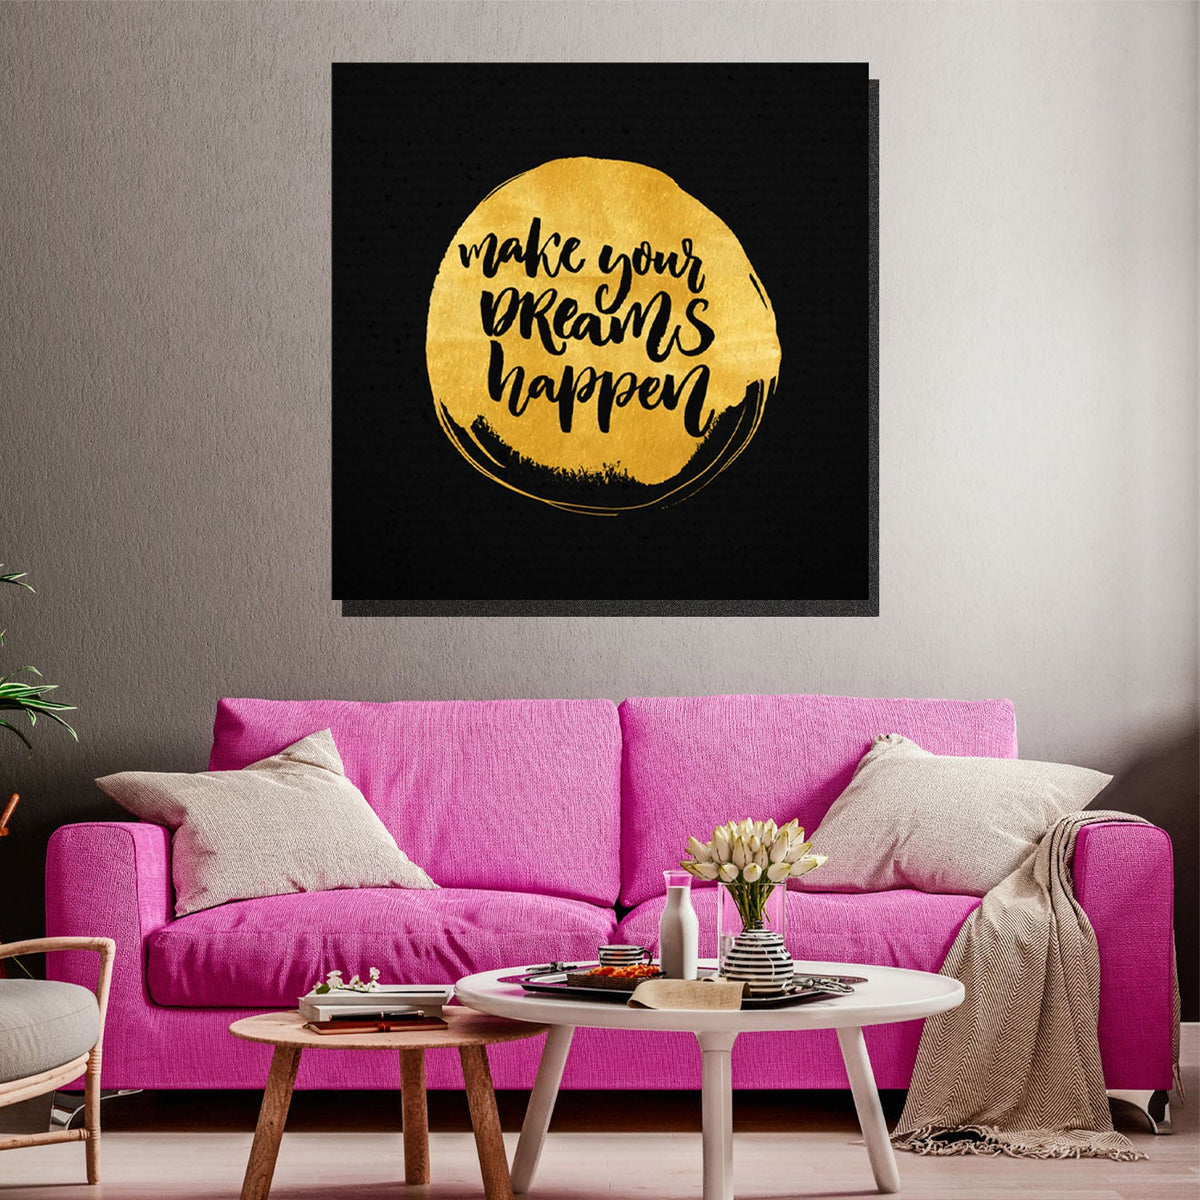 https://cdn.shopify.com/s/files/1/0387/9986/8044/products/MakeyourDreamHappenCanvasArtprintStretched-4.jpg